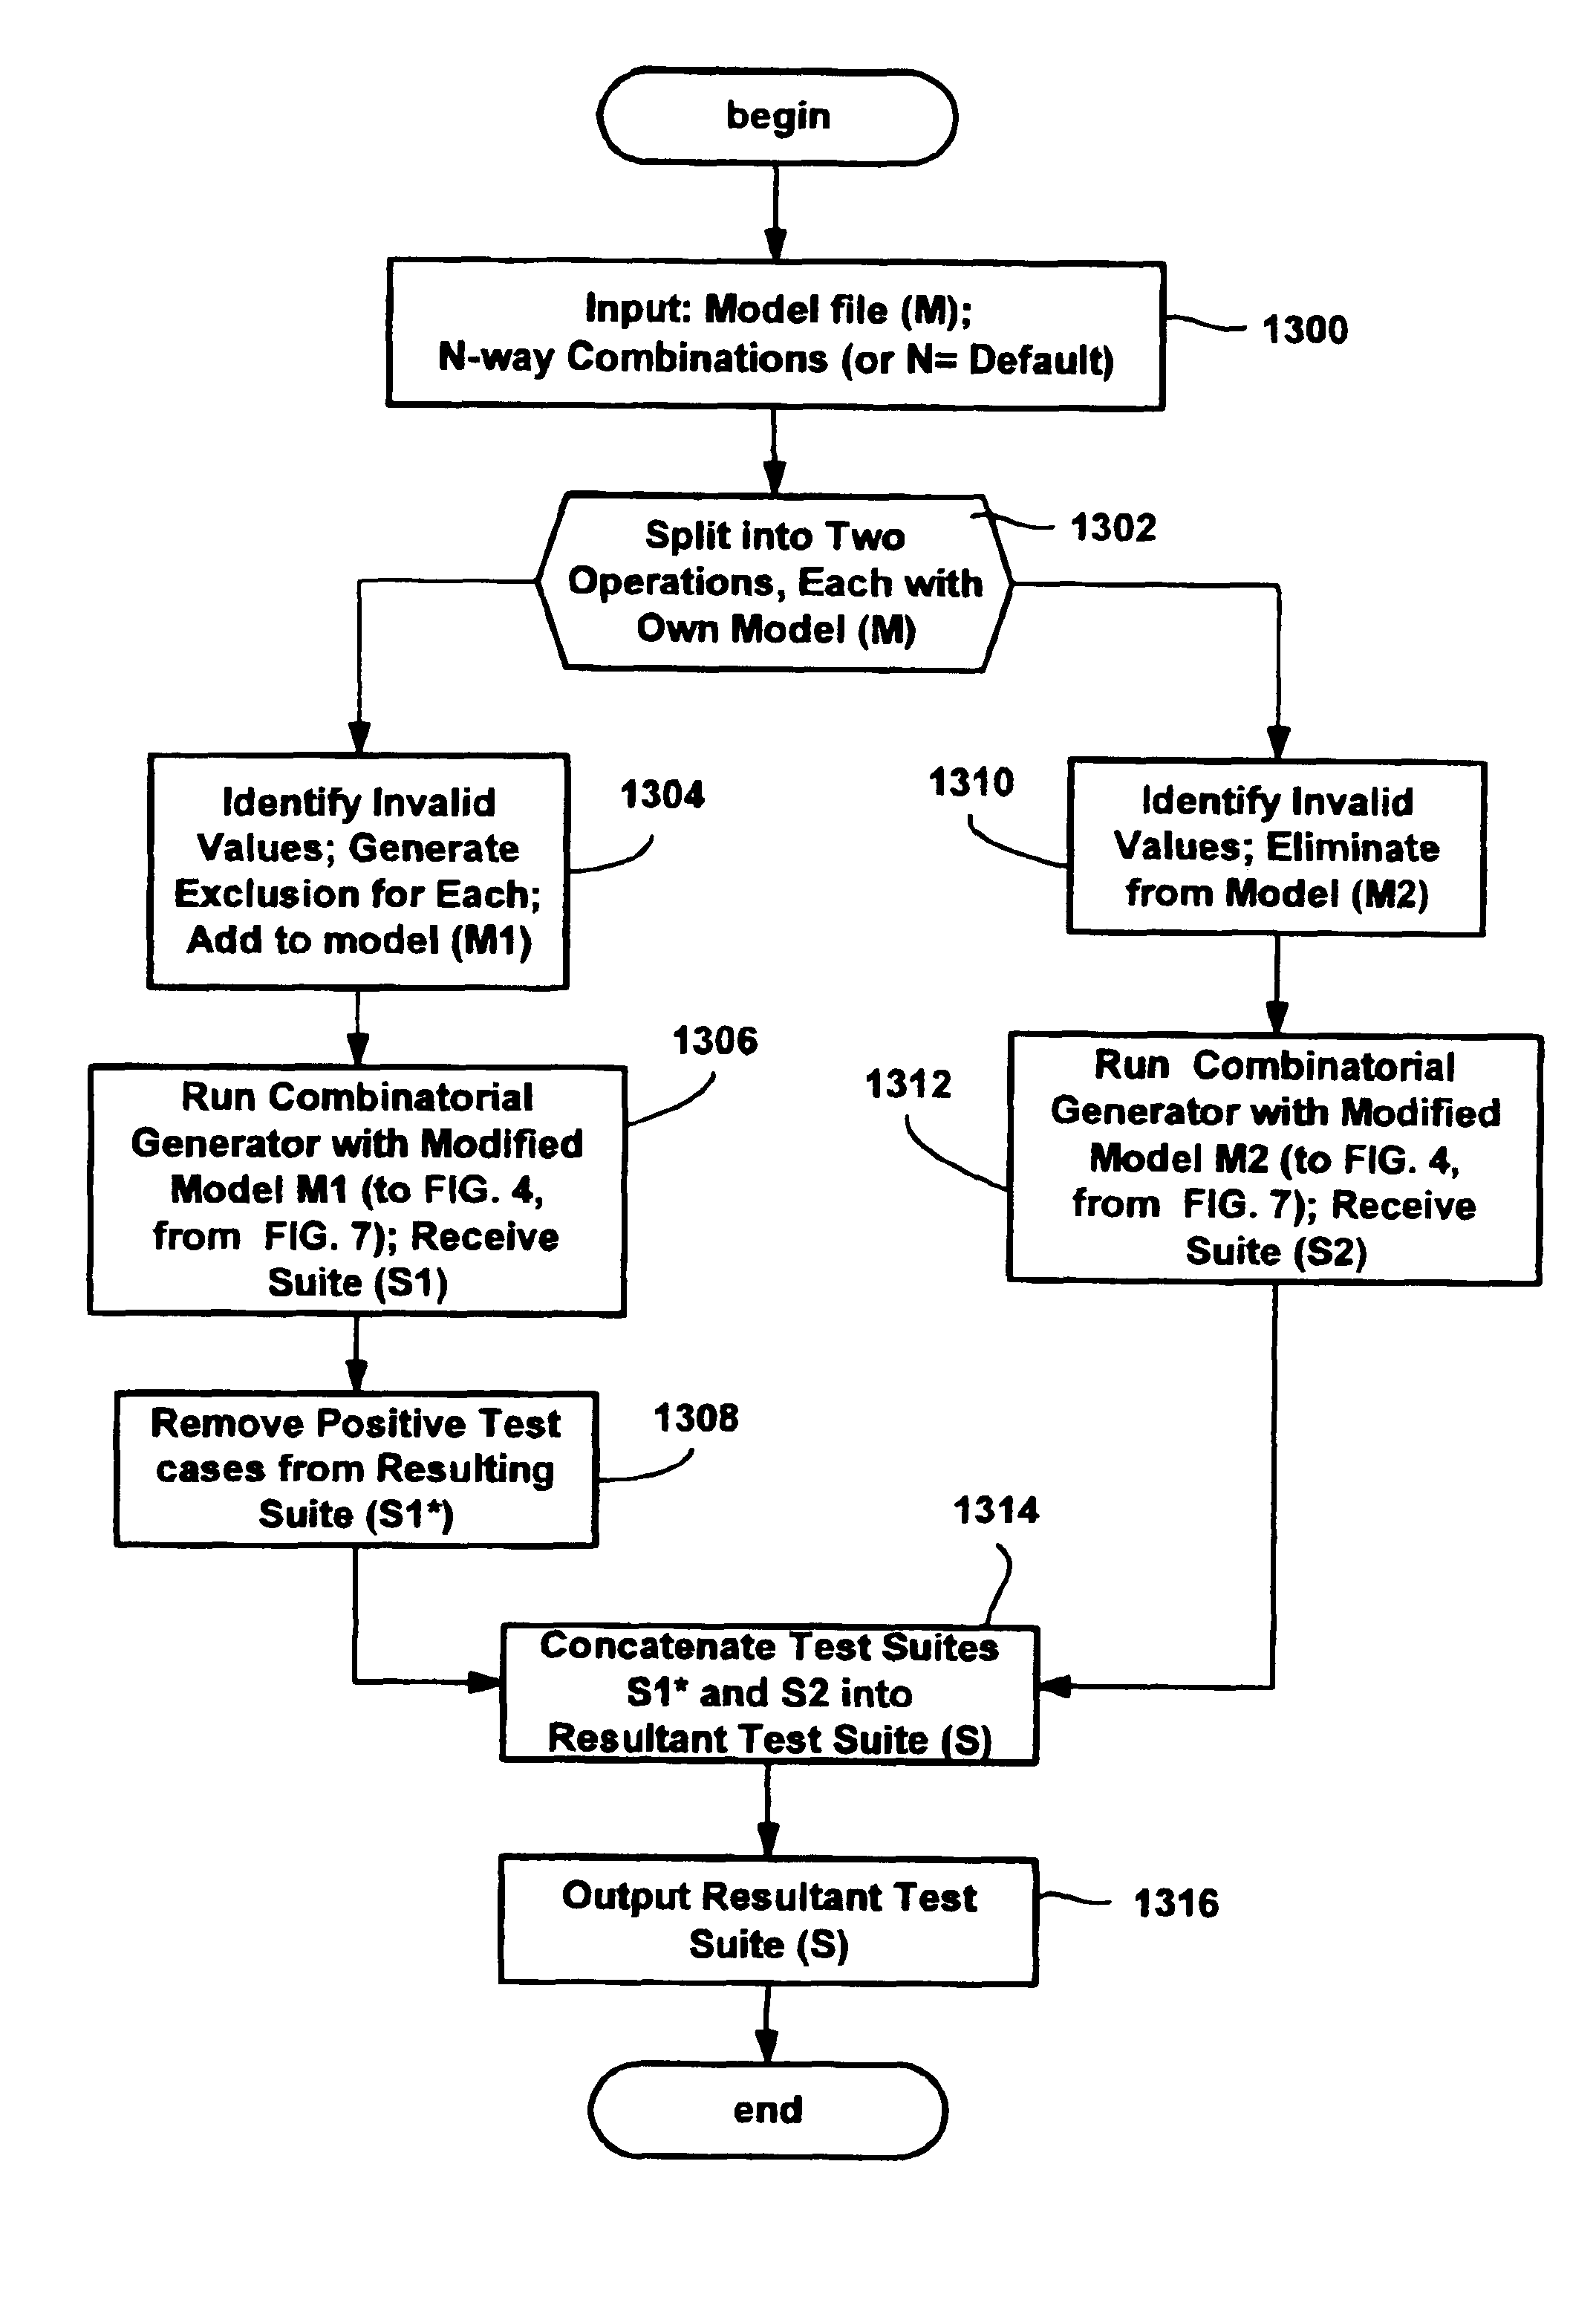 Method and system for supporting negative testing in combinatorial test case generators